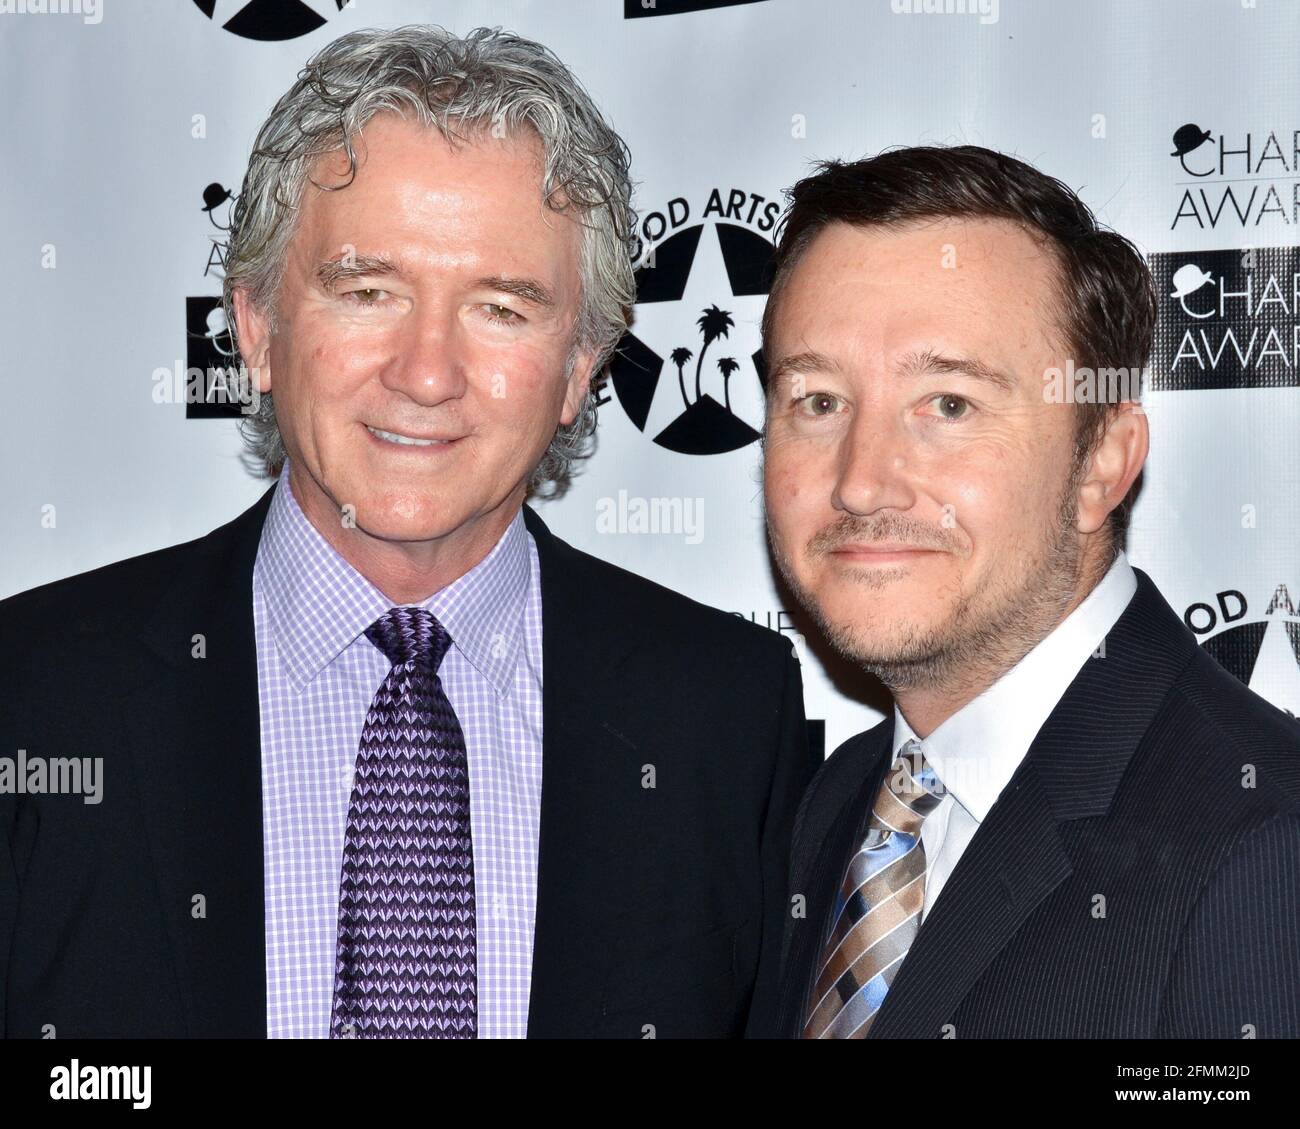 tidevand himmel lækage May 1, 2015, Hollywood, California, USA: Patrick Duffy and Padraic Duffy  attend the 29th Annual Charlie Awards Luncheon by The Hollywood Arts  Council. (Credit Image: © Billy Bennight/ZUMA Wire Stock Photo - Alamy